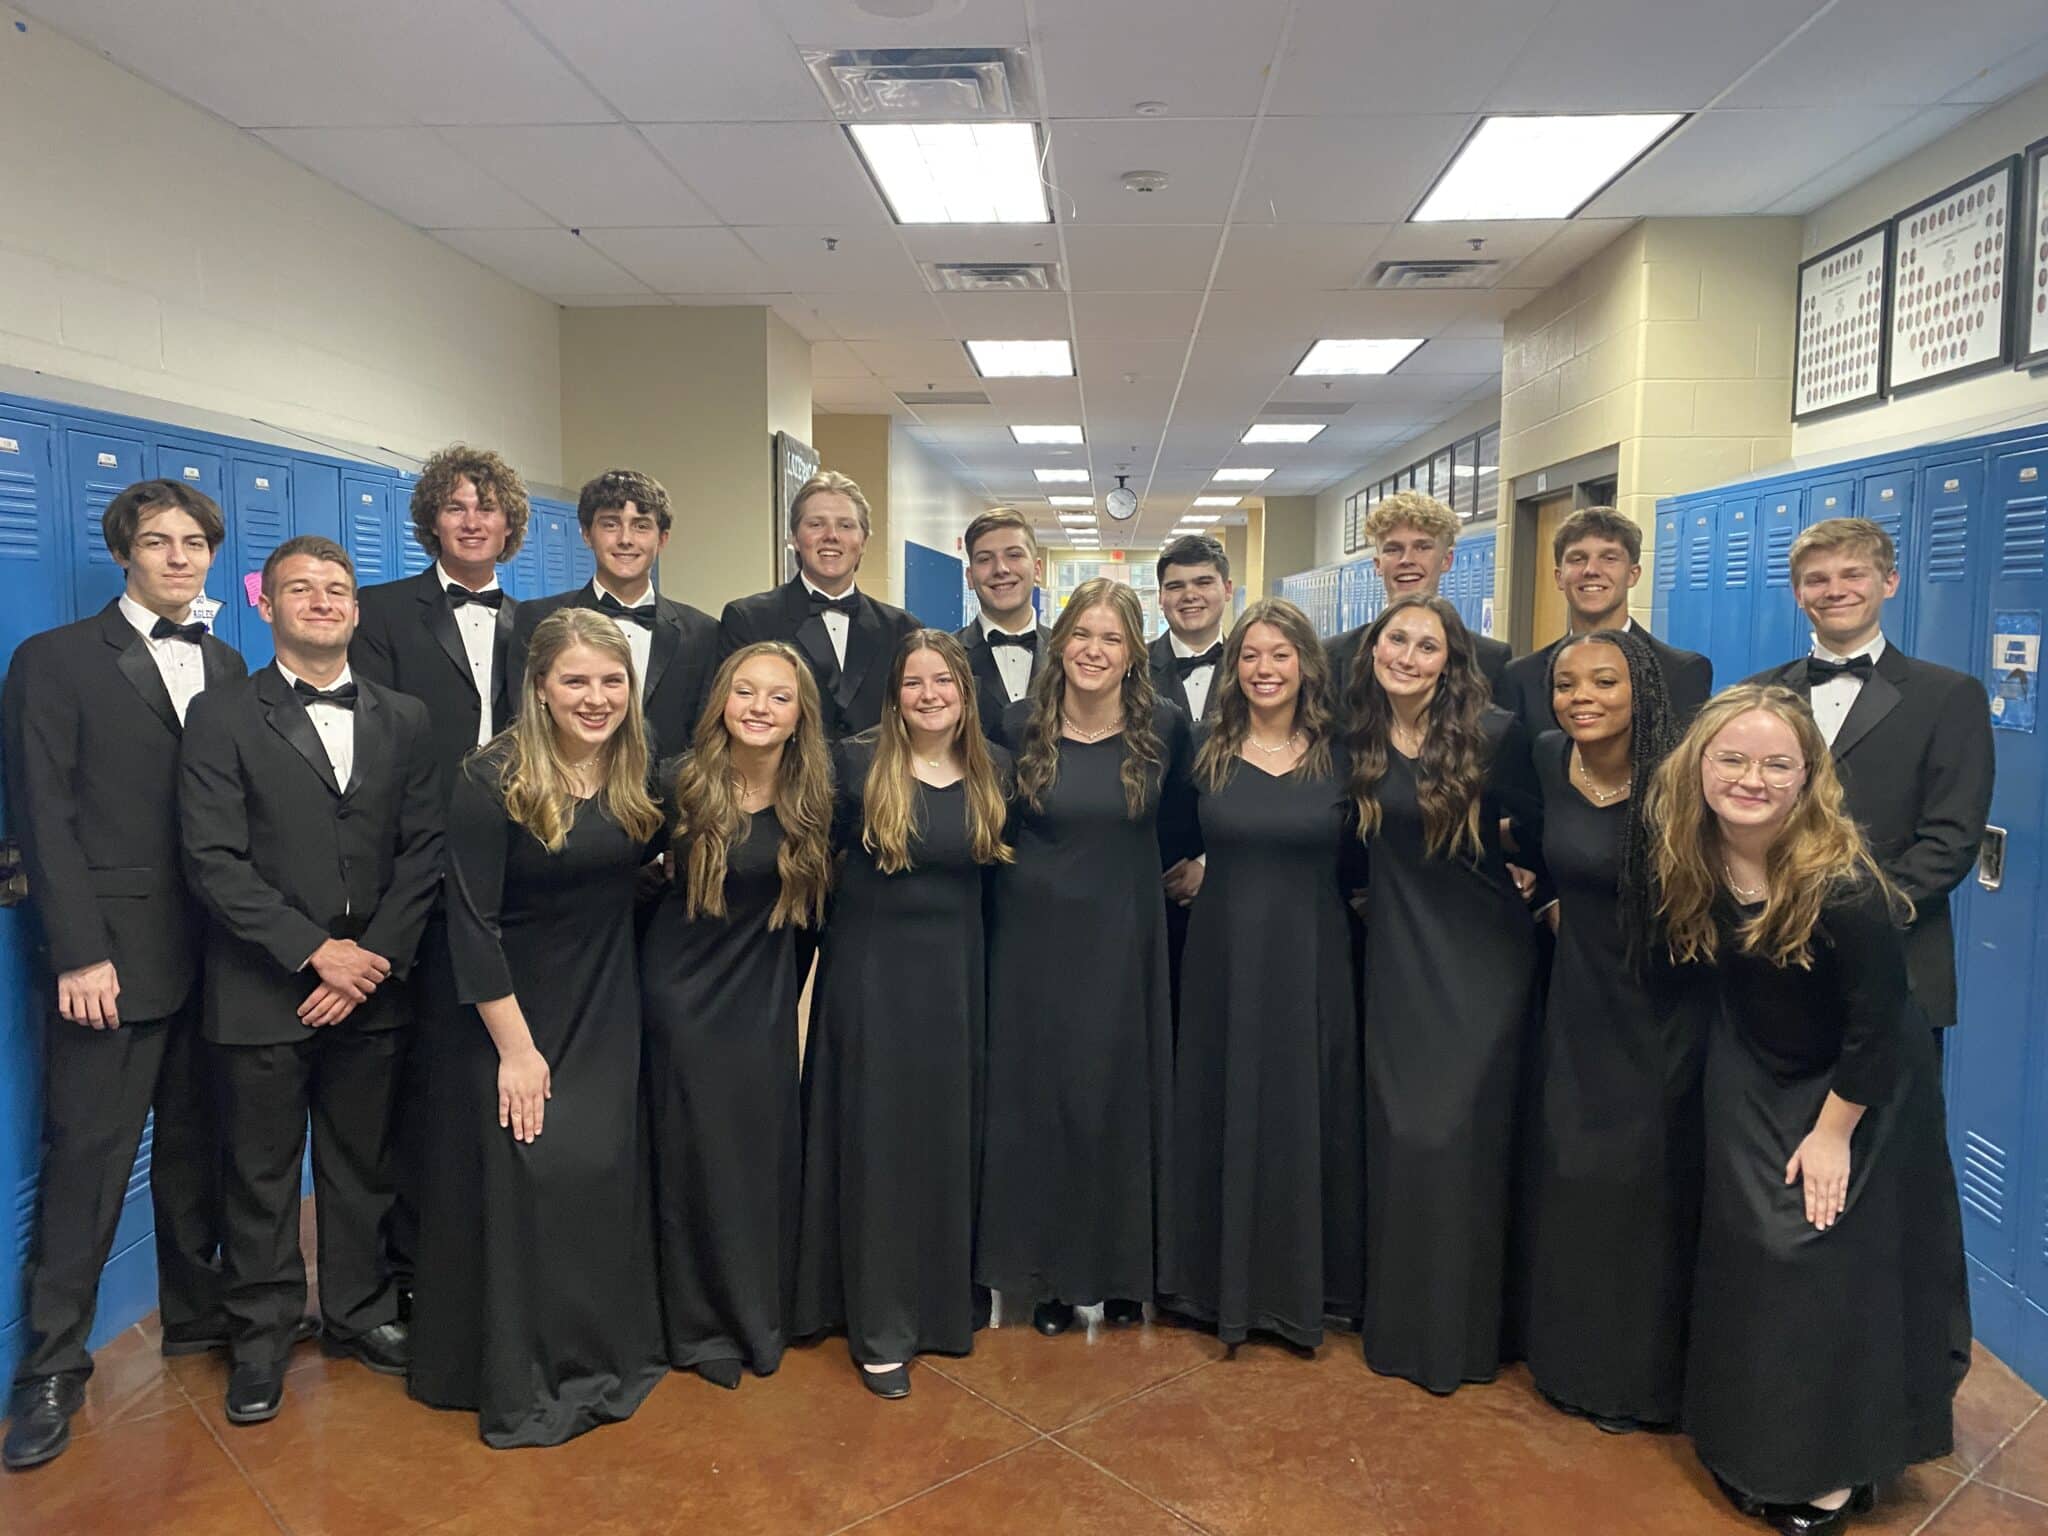 (left to right) Three SCA ensembles received a rating of gold including JSE Boys, JSE Senior Mixed Ensemble and JSE Junior Mixed Ensemble. State Gold medalists in an ensemble included front row left to right: Emma Coats, Hannah Wyssmann, Abagail Stidham, Jaidyn Hohl, Avery Whitfield, Mackenzie Osborn, Karinton Newton, and Addison Davies. Back row left to right: Adrian Haack, Michael Ward, Xander Zumwalt, David Gilkeson, Hunter Harris, Braeden Wooldridge, George Hoelzel, James Lee, Owen Stienstra, and Harry Williams.